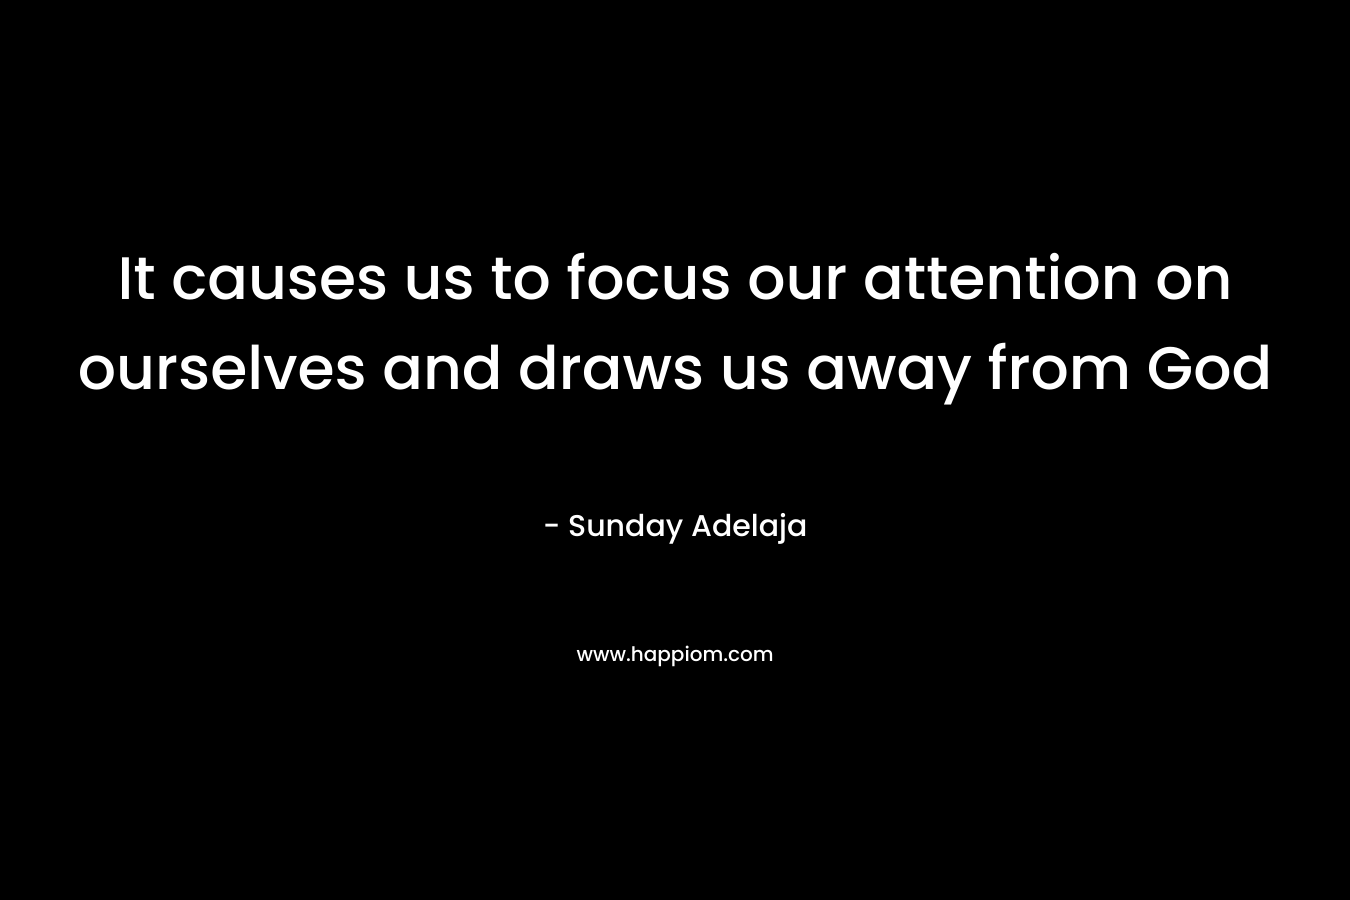 It causes us to focus our attention on ourselves and draws us away from God